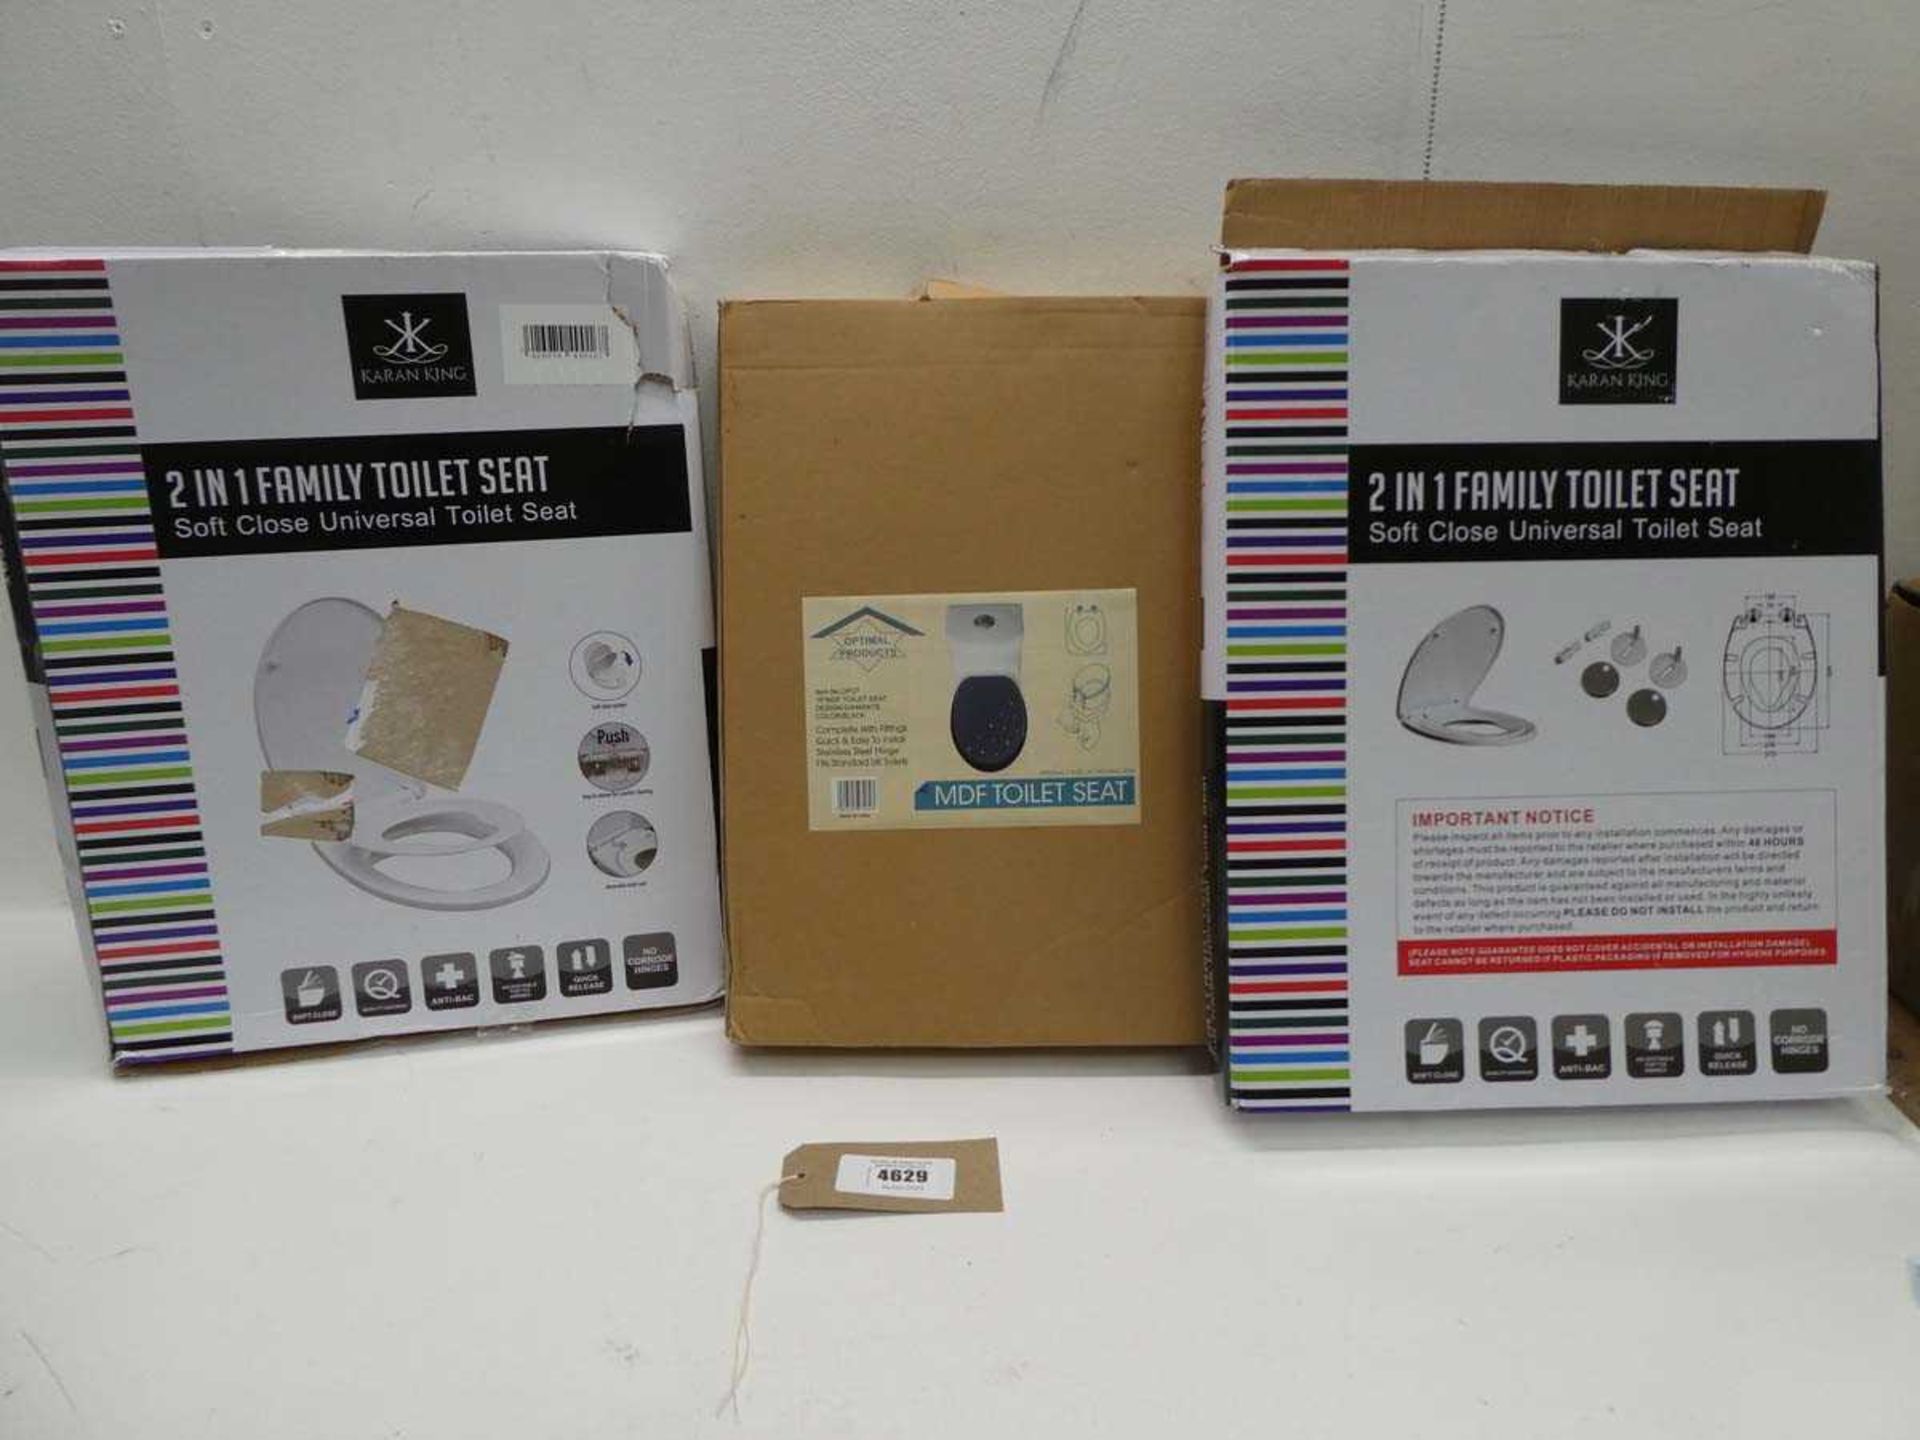 +VAT 2 soft close universal toilet seats and MDF toilet seat